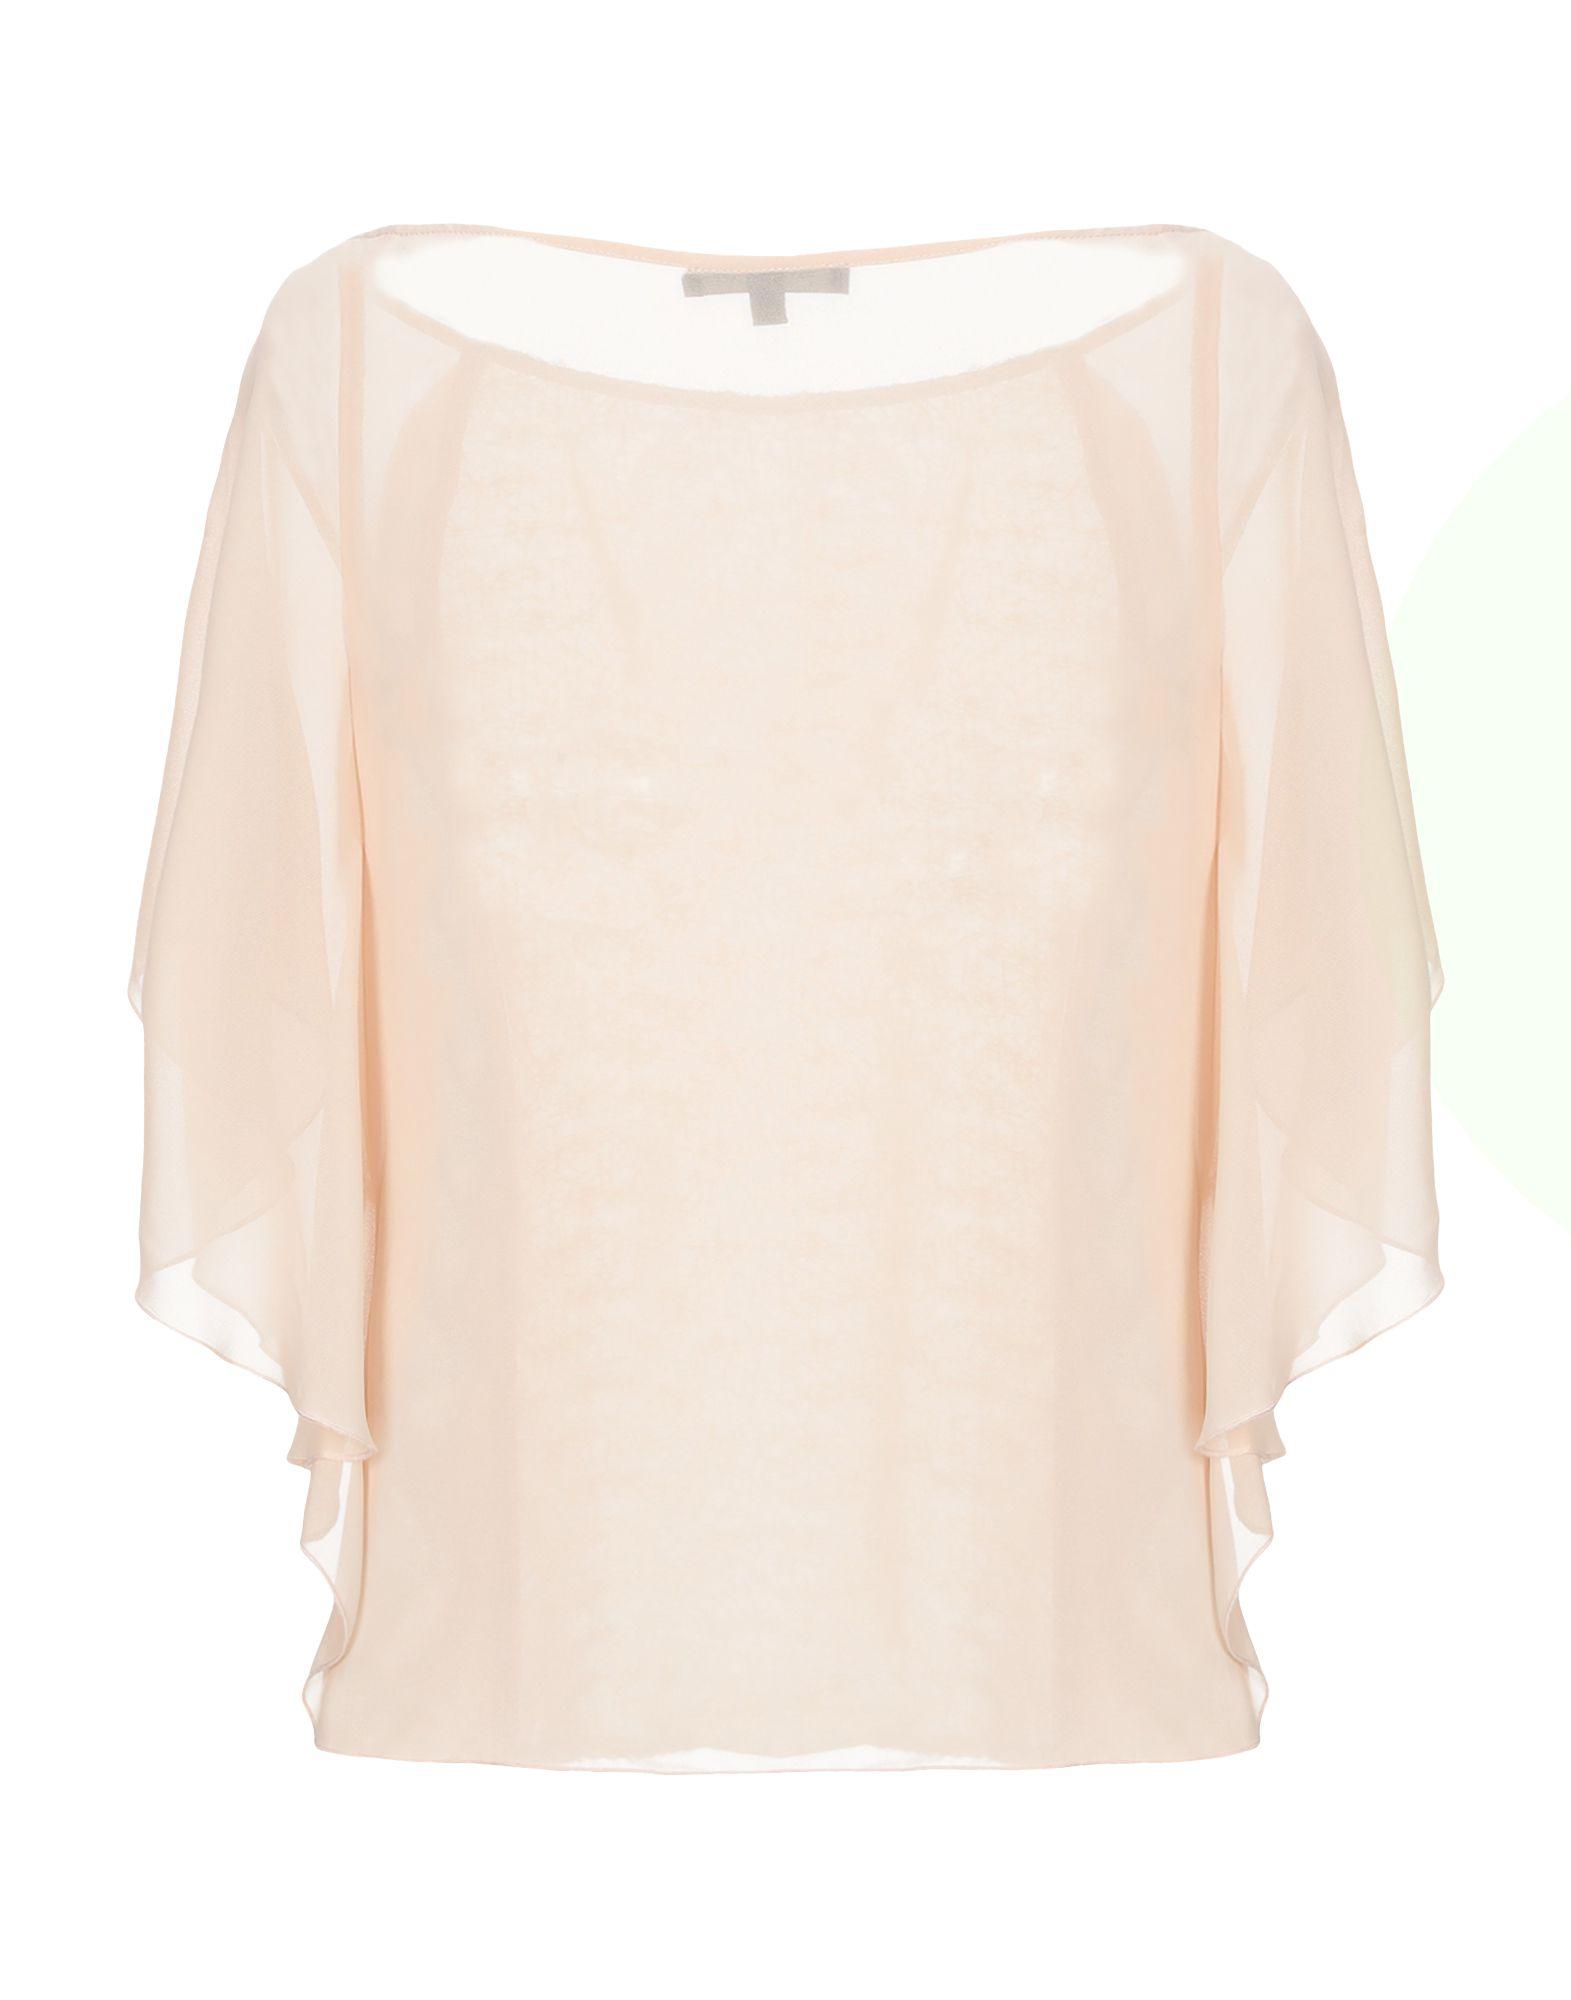 Patrizia Pepe Synthetic Blouse in Sand (Natural) - Lyst